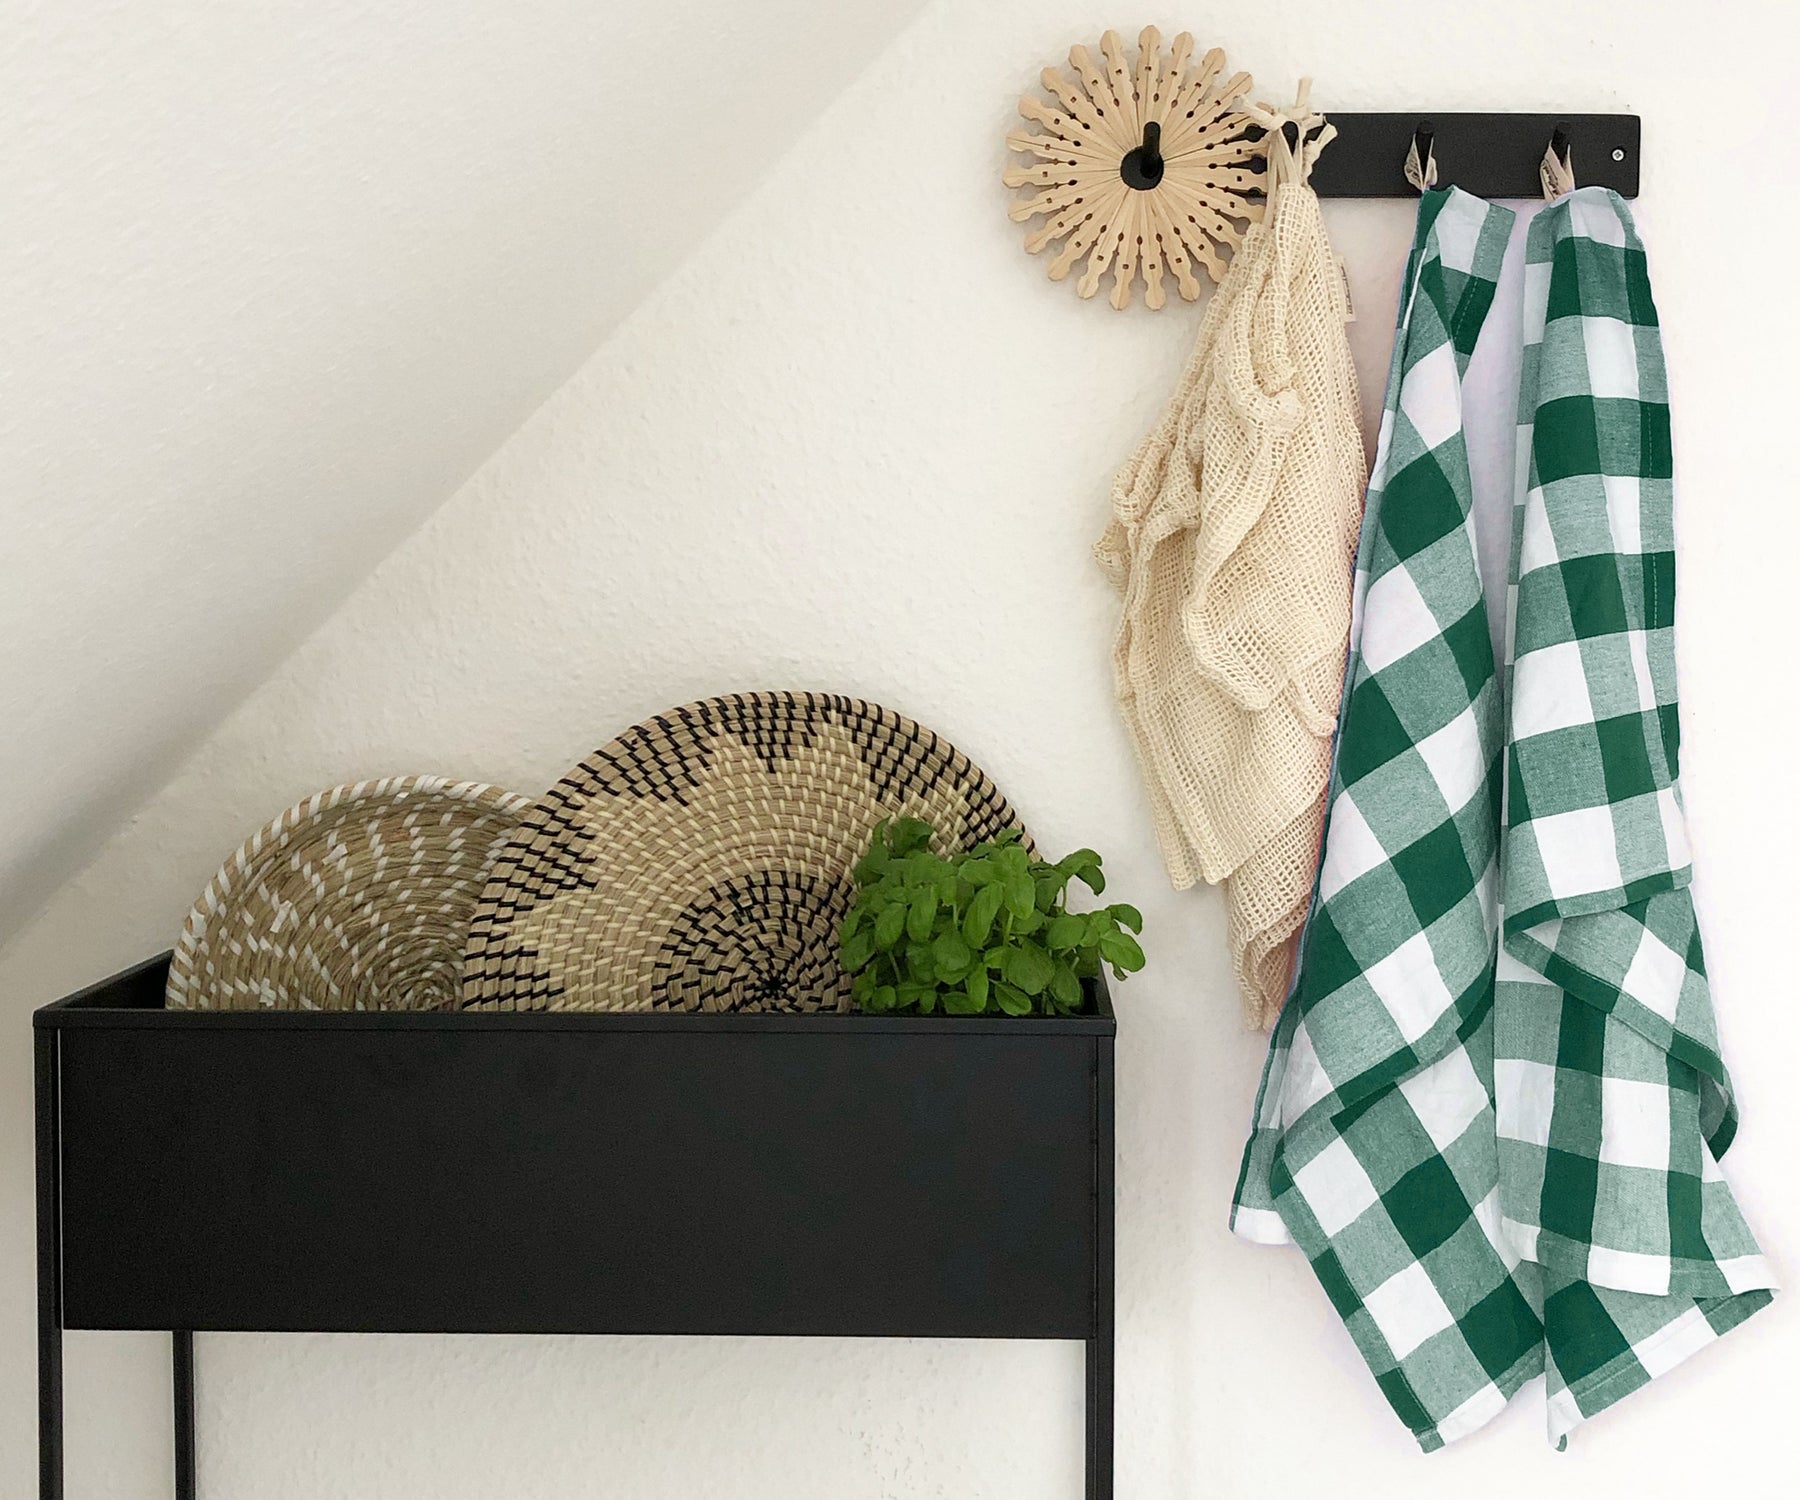 Green and white dish towels are a fun and festive choice for kitchens, perfect for the holidays or any special occasion.